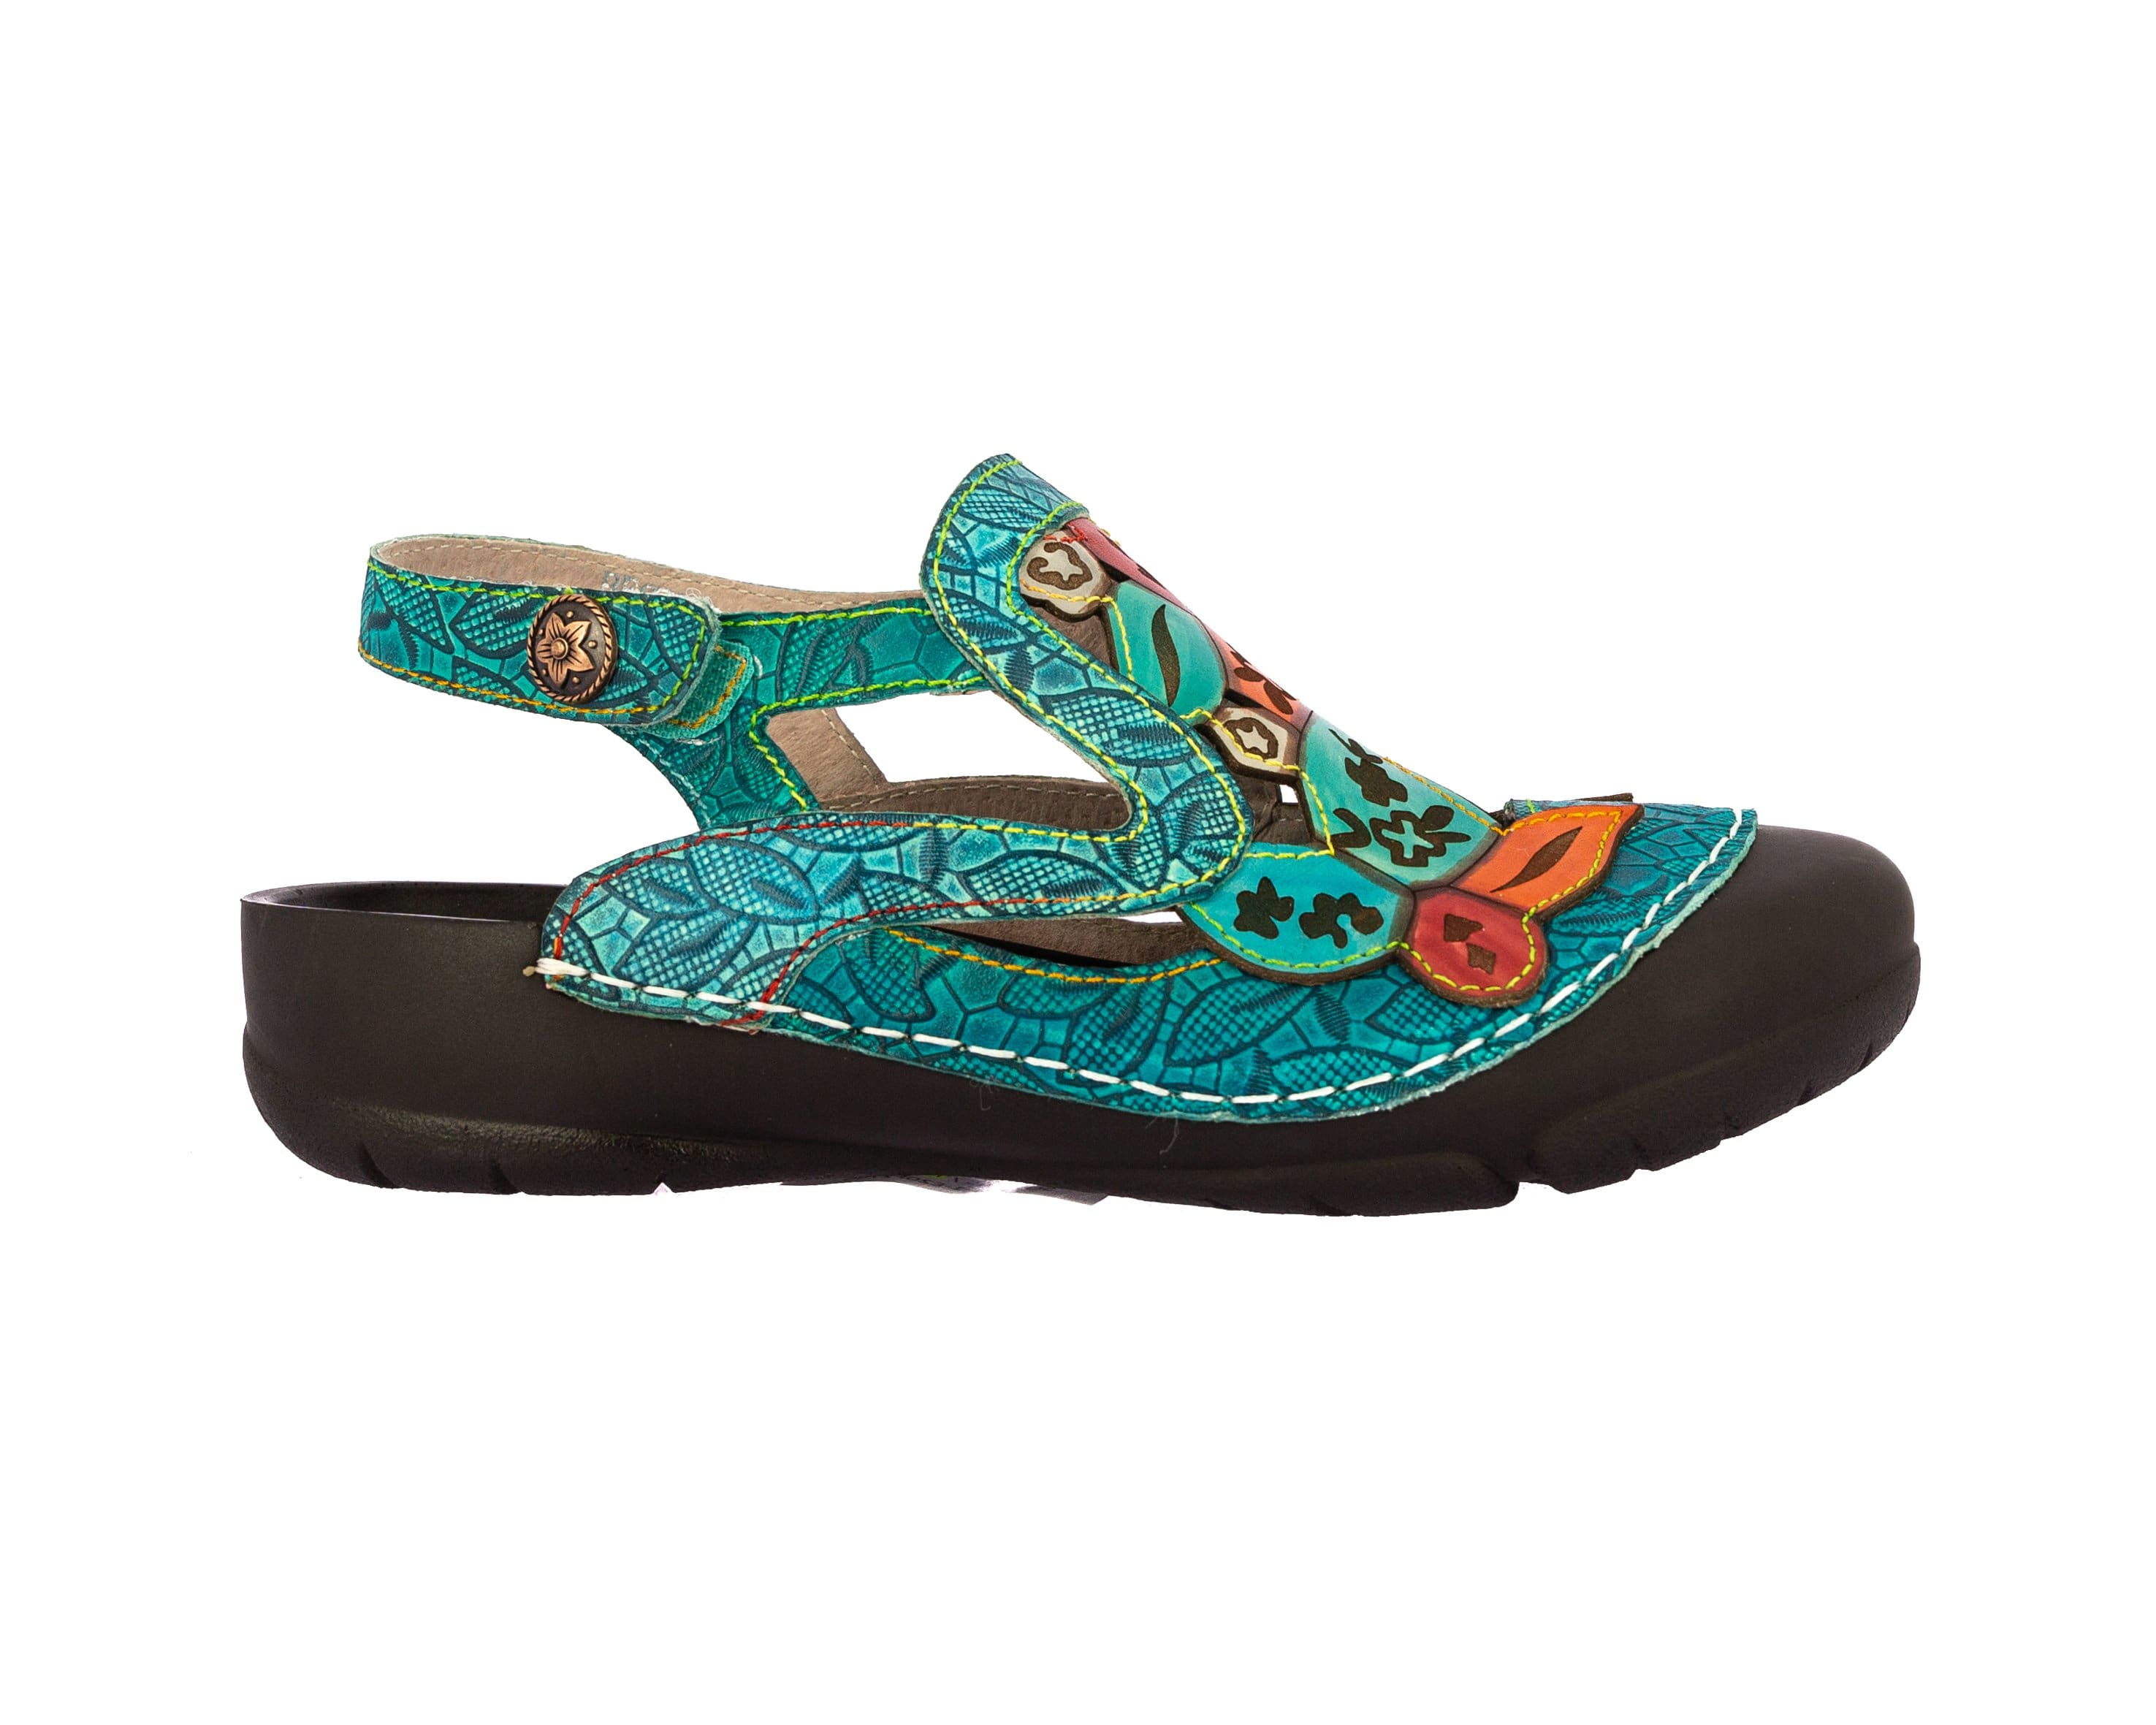 Skor BECZIERSO 01 - 35 / TURQUOISE - Sandal